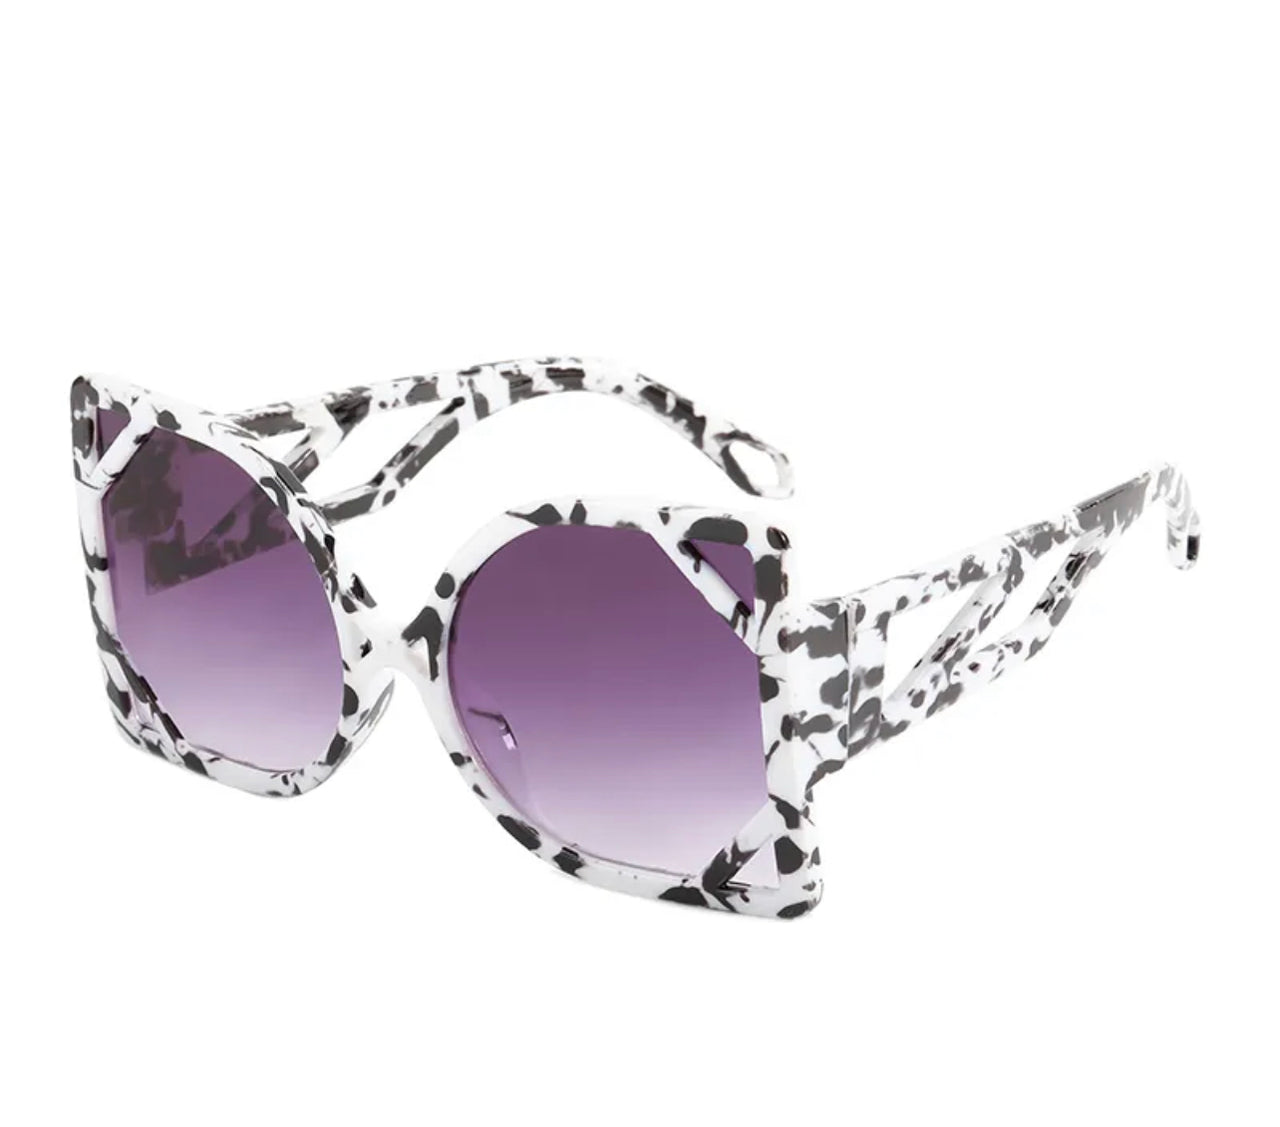 The "Butterfly" Shades